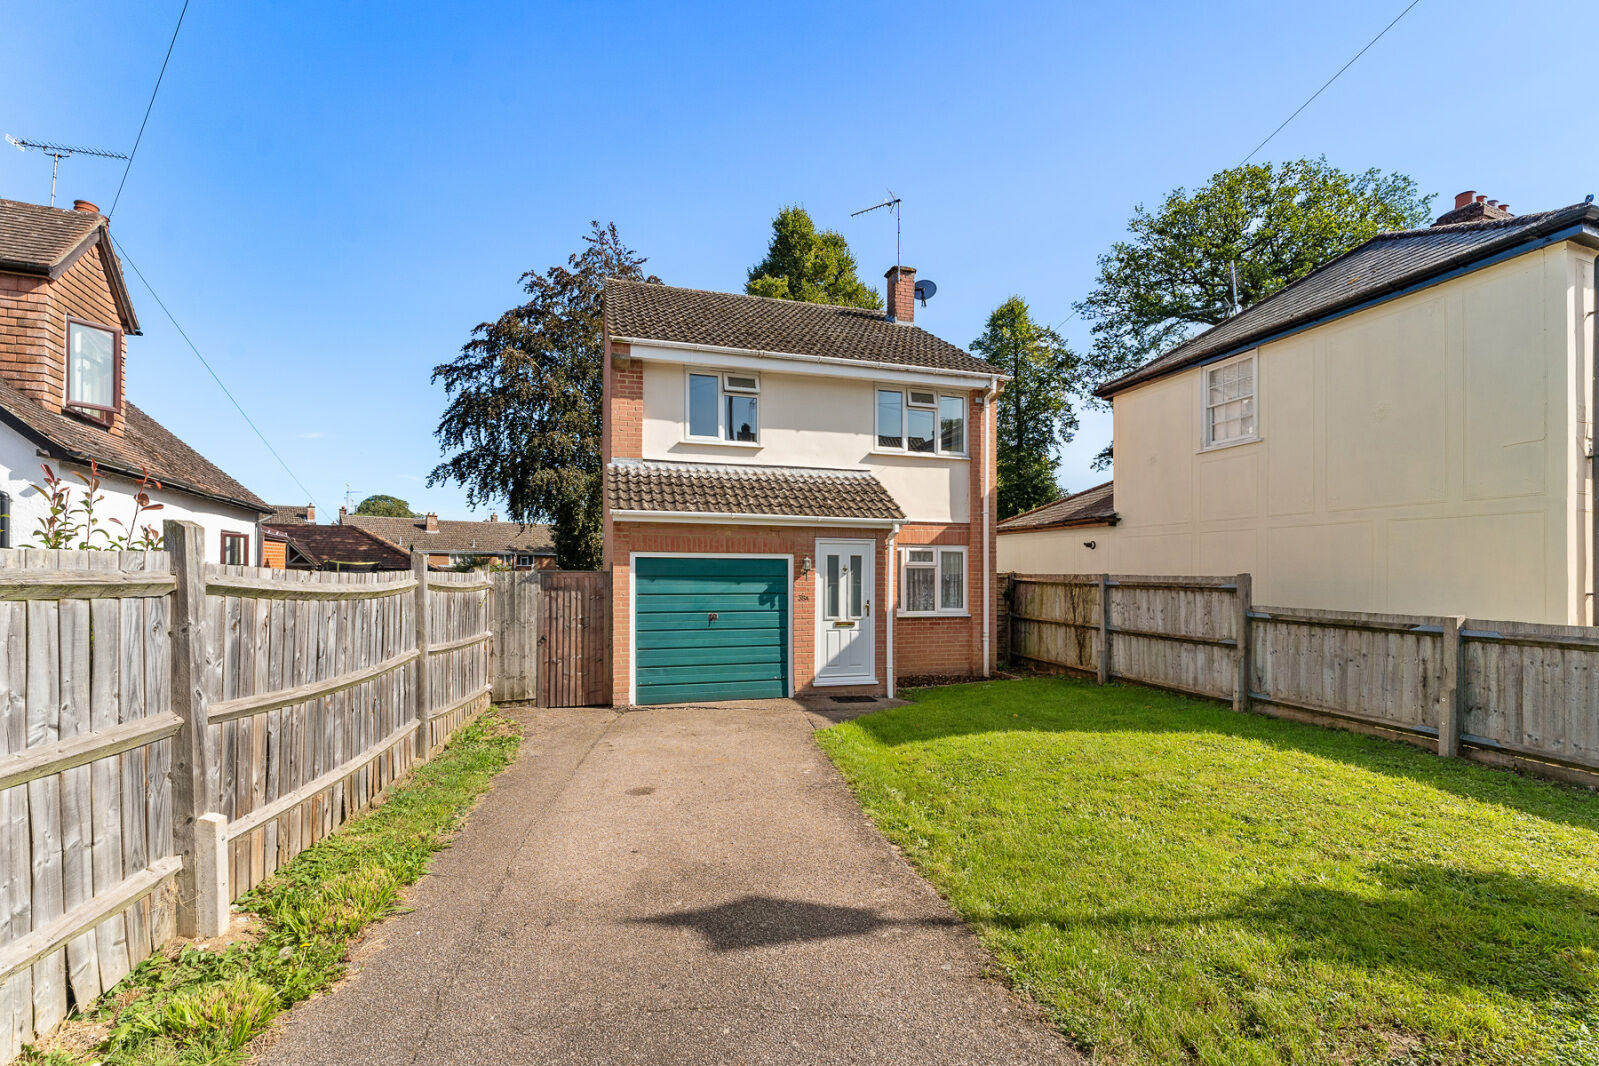 3 bedroom detached house for sale Bentfield Road, Stansted, CM24, main image